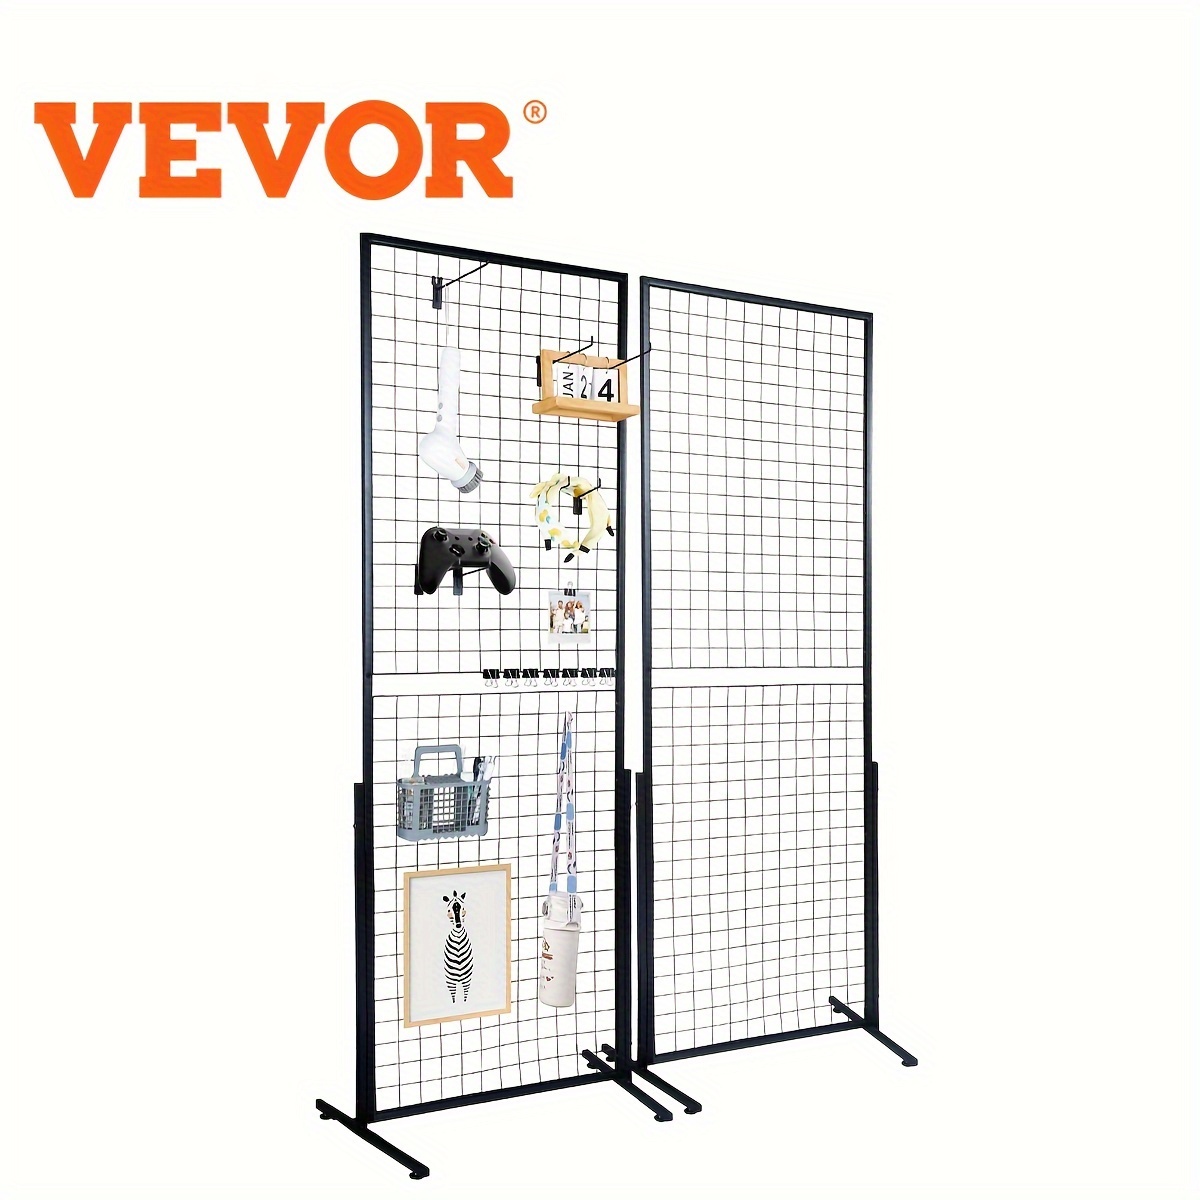 

Vevor 2' X 5.6' Grid Wall Panels Tower, 2 Packs Wire Grid Panels With T-base Floorstanding, Double Side Panels For Art Craft Shows, Retail Display With Extra Clips And Hooks